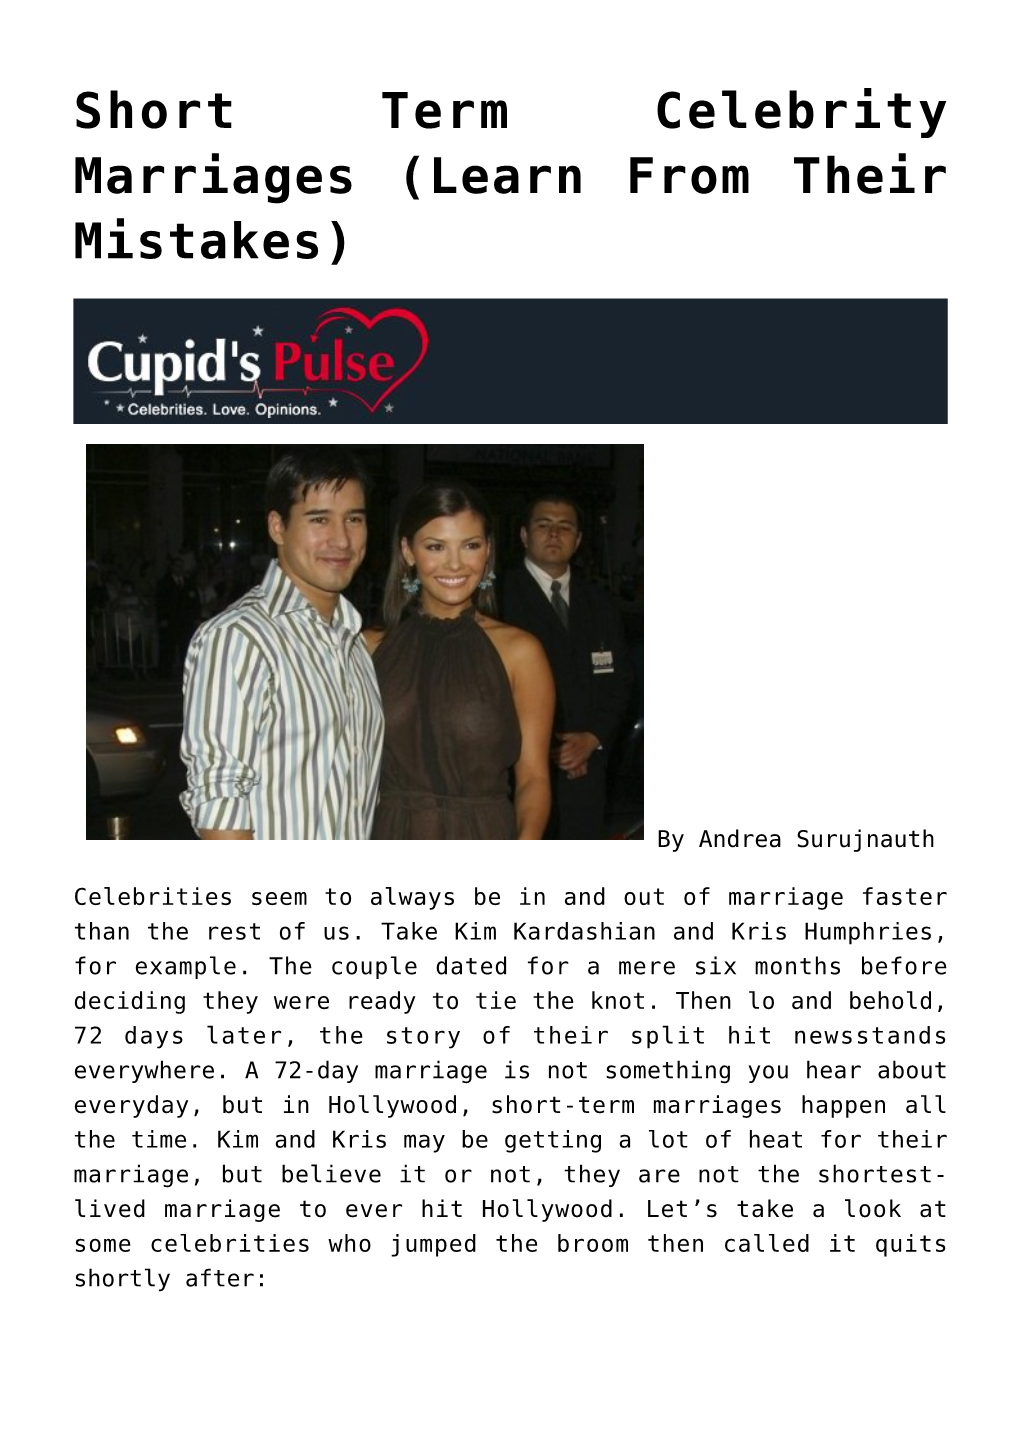 Short Term Celebrity Marriages (Learn from Their Mistakes),Author